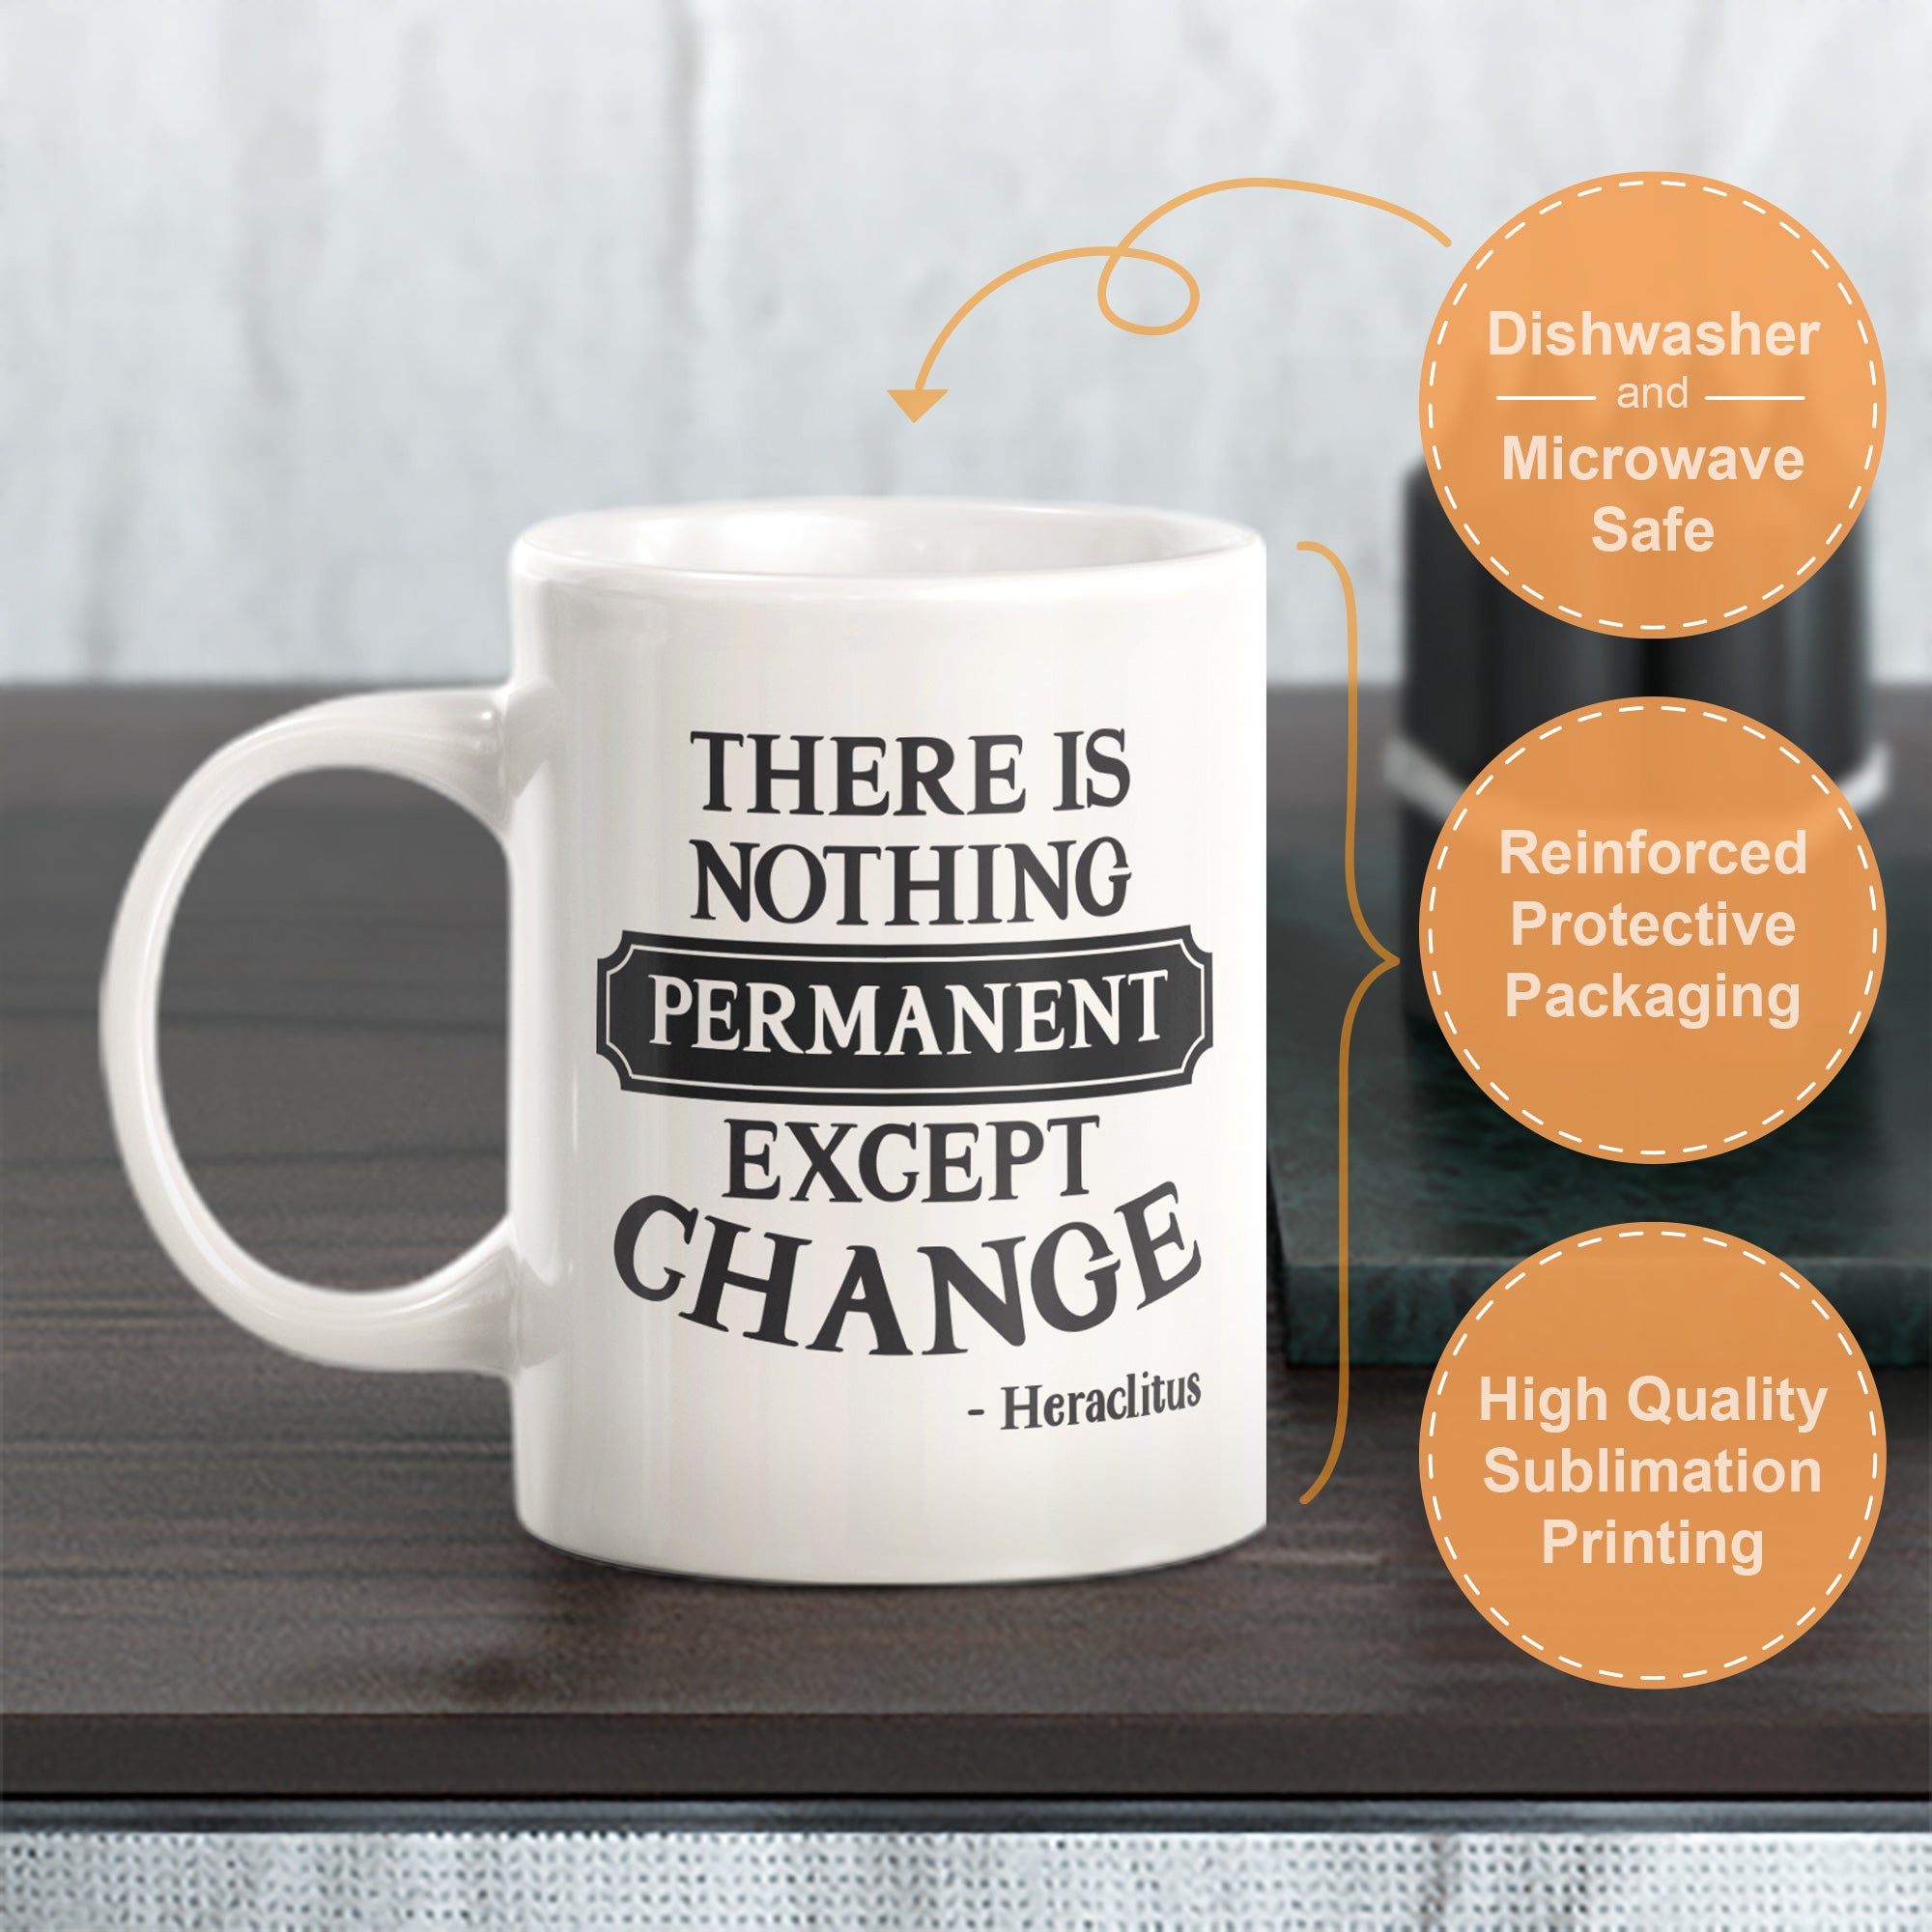 There Is Nothing Permanent Except Change - Heraclitus Coffee Mug